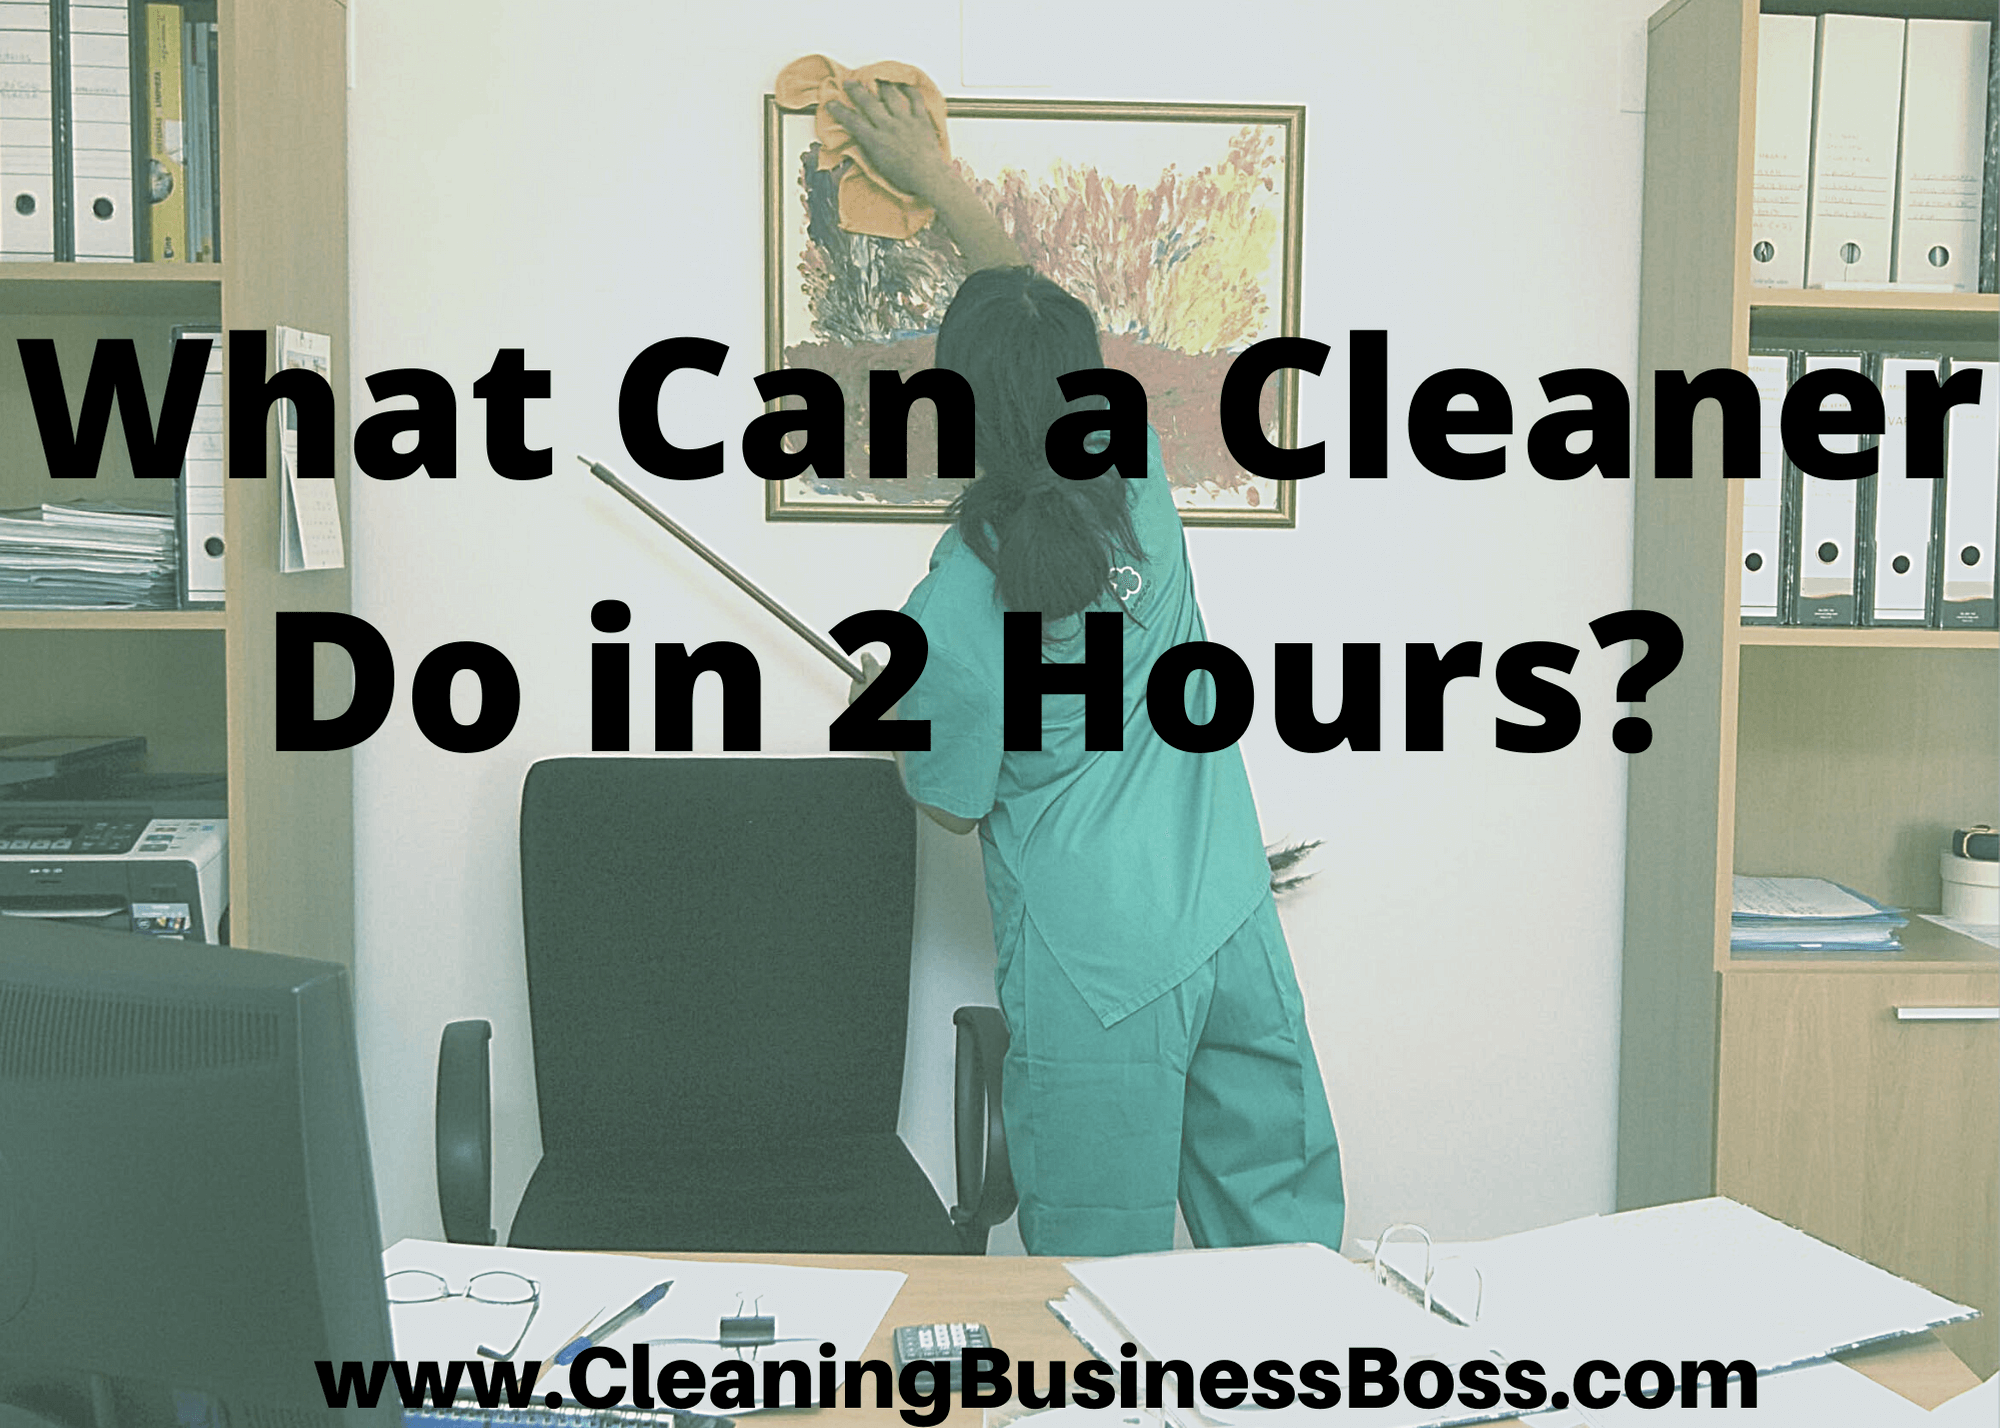 What Can A Cleaner Do in 2 Hours?